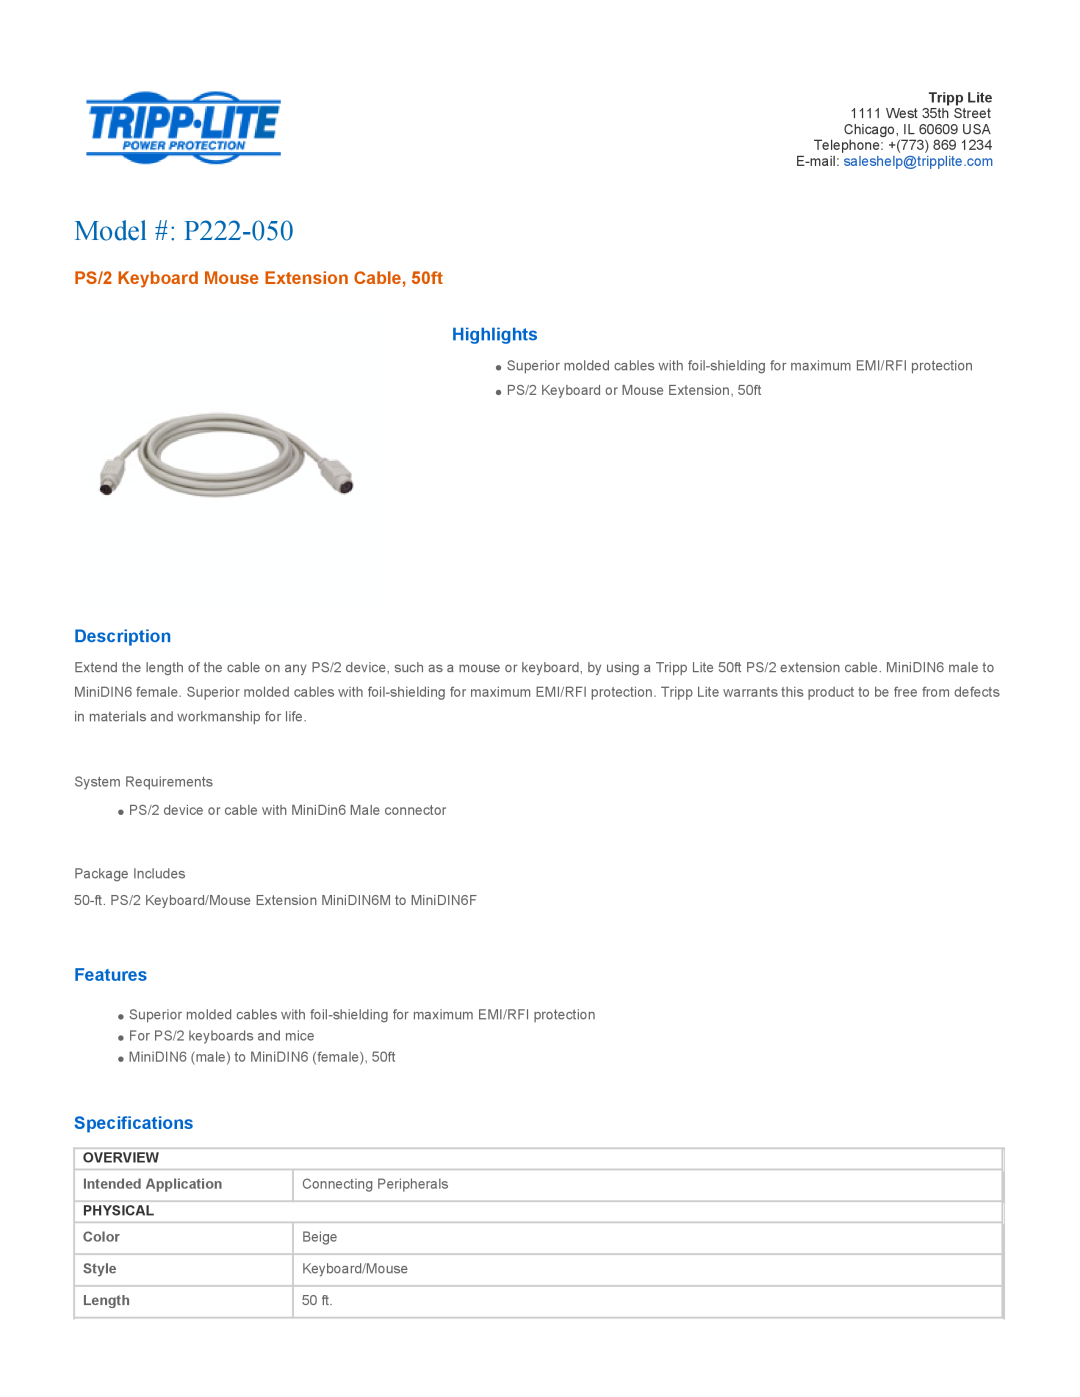 Tripp Lite P222-050 specifications Overview, Intended Application, Connecting Peripherals, Physical, Color, Beige, Style 